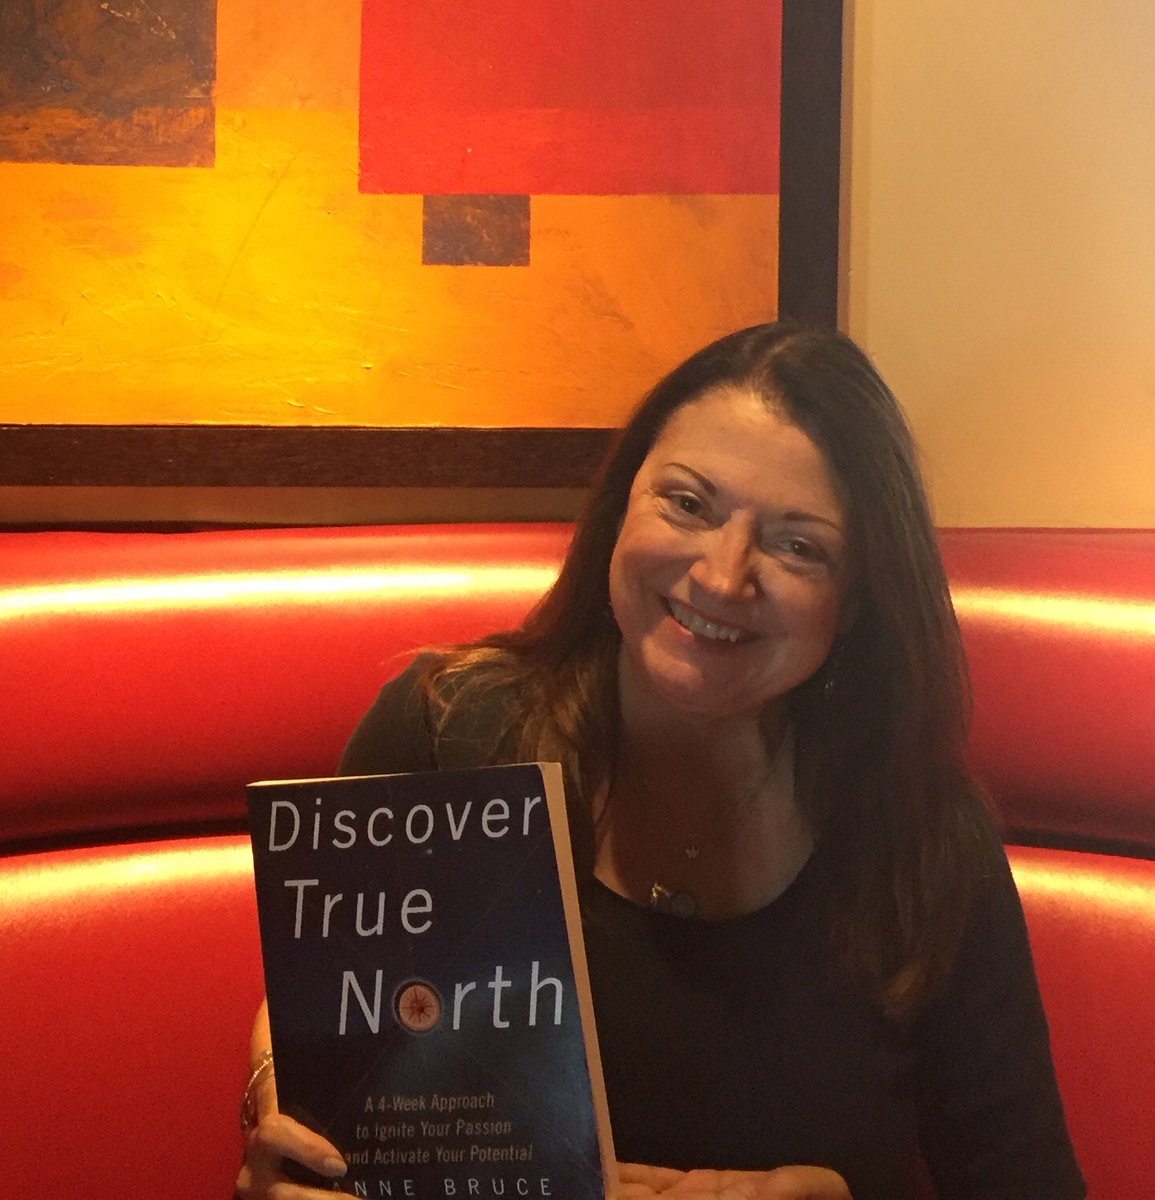 Life can be scary. Did you know you have an inner voice of courage that will speak to you when you need it most? Check out page 61 in my life-coaching book, 'Discover True North,' to find out how to activate the process. #DiscoverTrueNorth #EmotionalCourage #McGrawHillAuthor